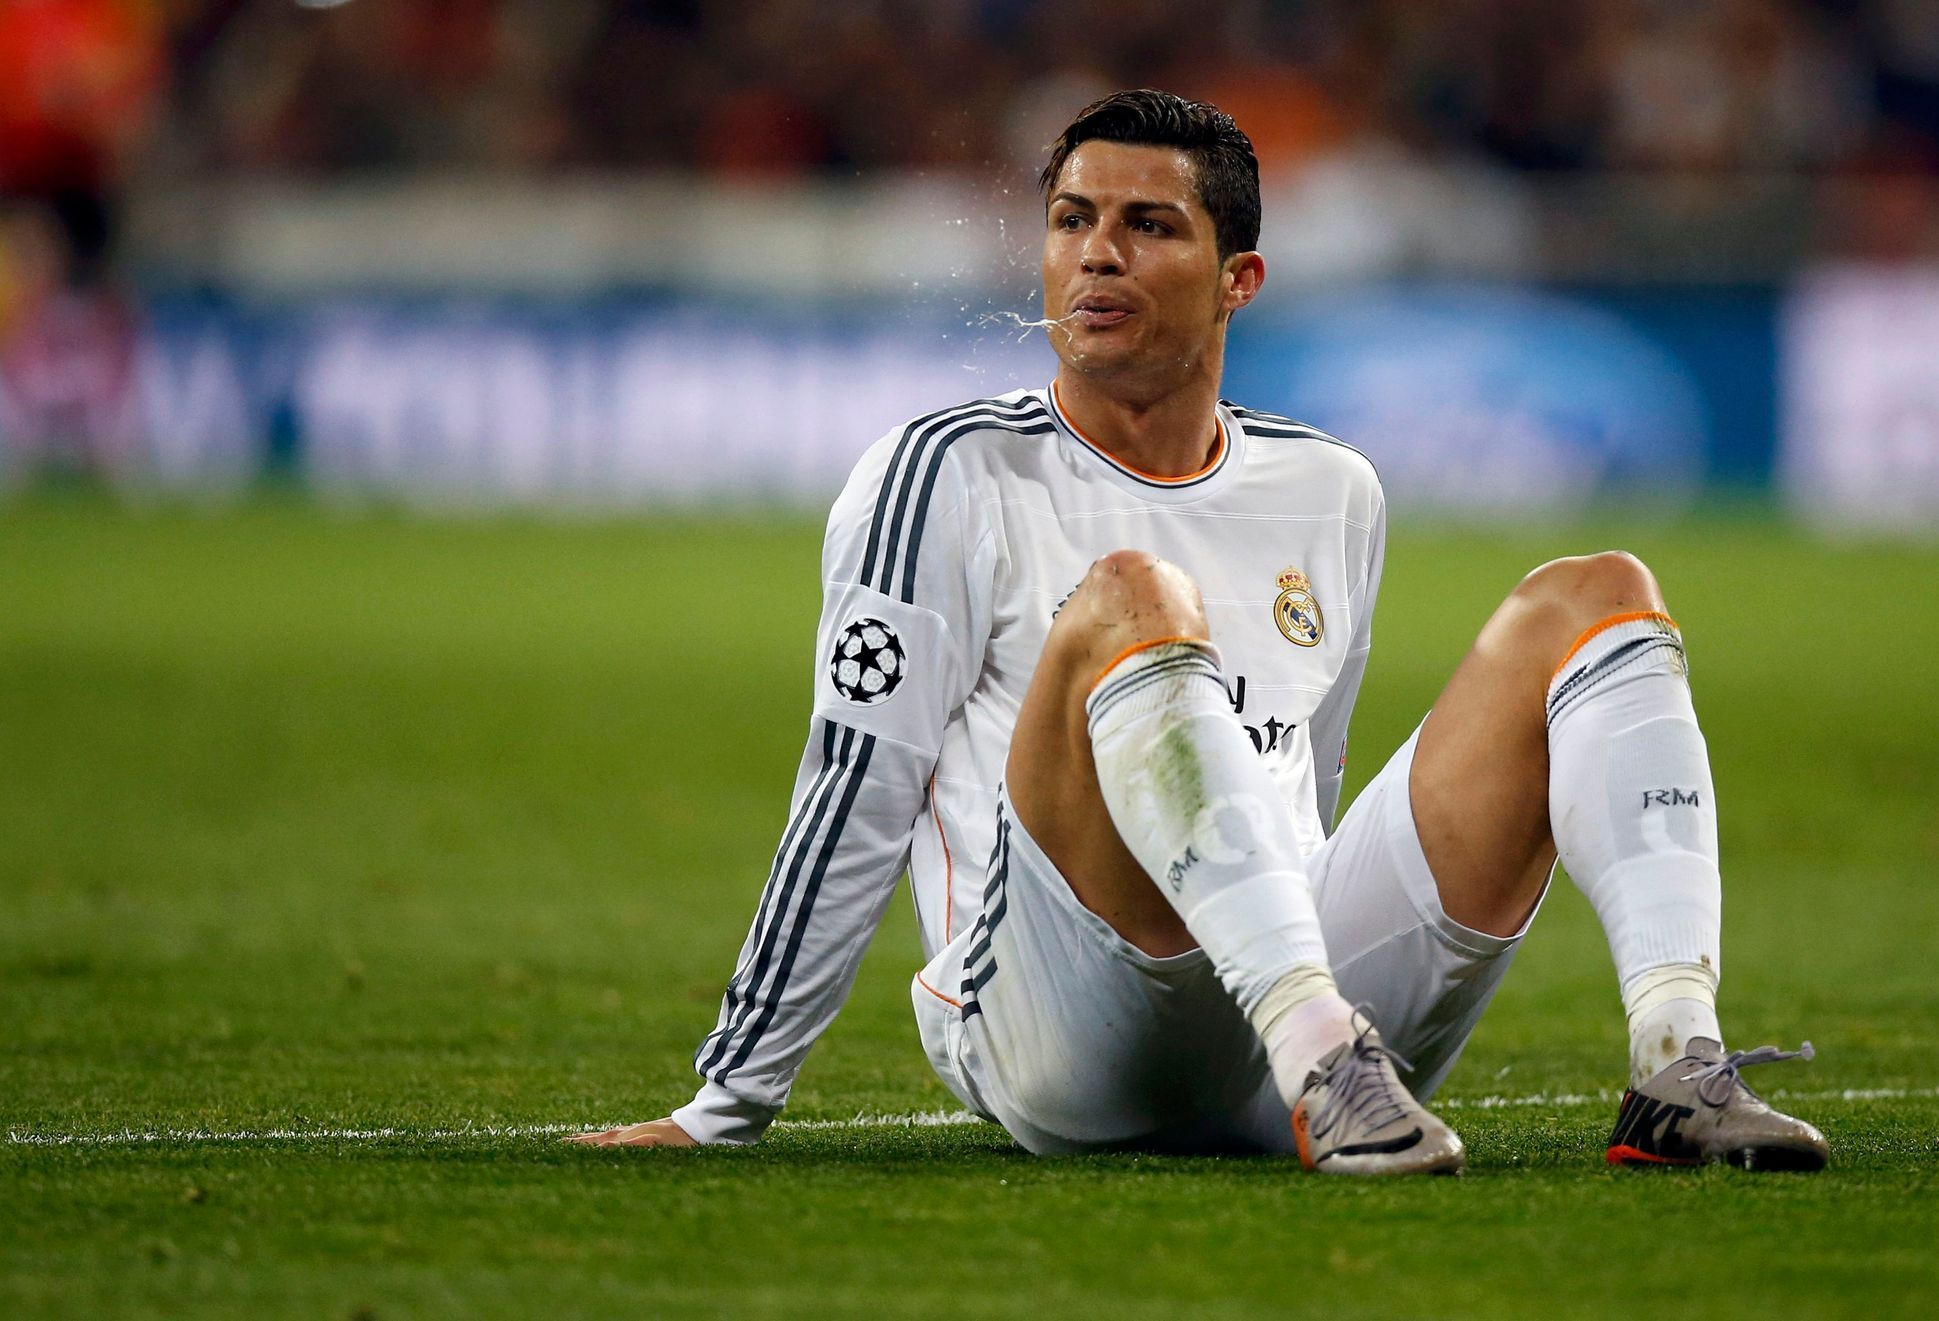 Real Madrid's Ronaldo spits out as he sits in the pitch during their Champions League quarter-final first leg soccer match against Borussia Dortmund in Madrid